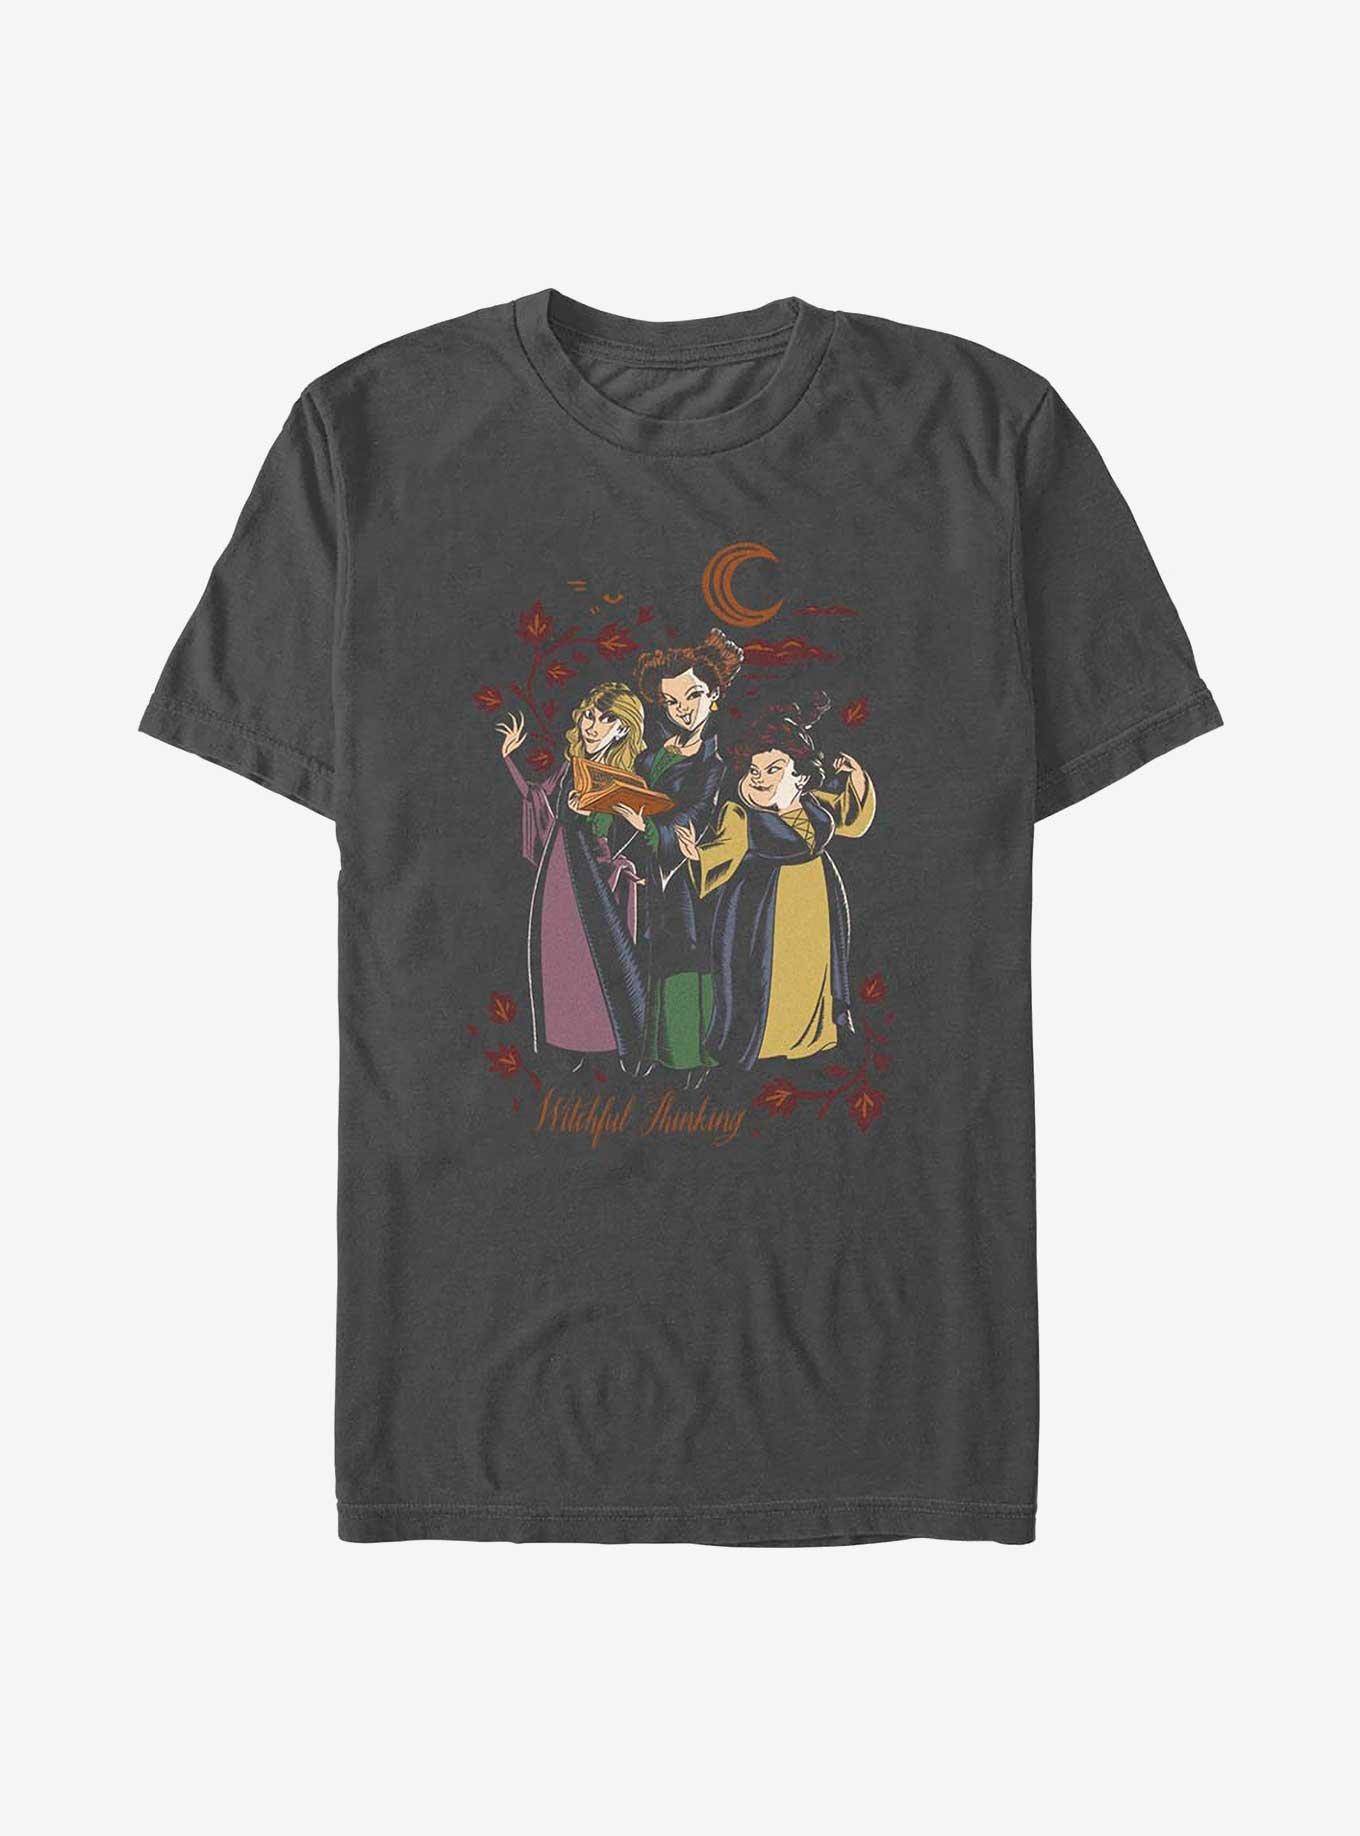 Disney Hocus Pocus Witchful Thinking Full T-Shirt, CHARCOAL, hi-res